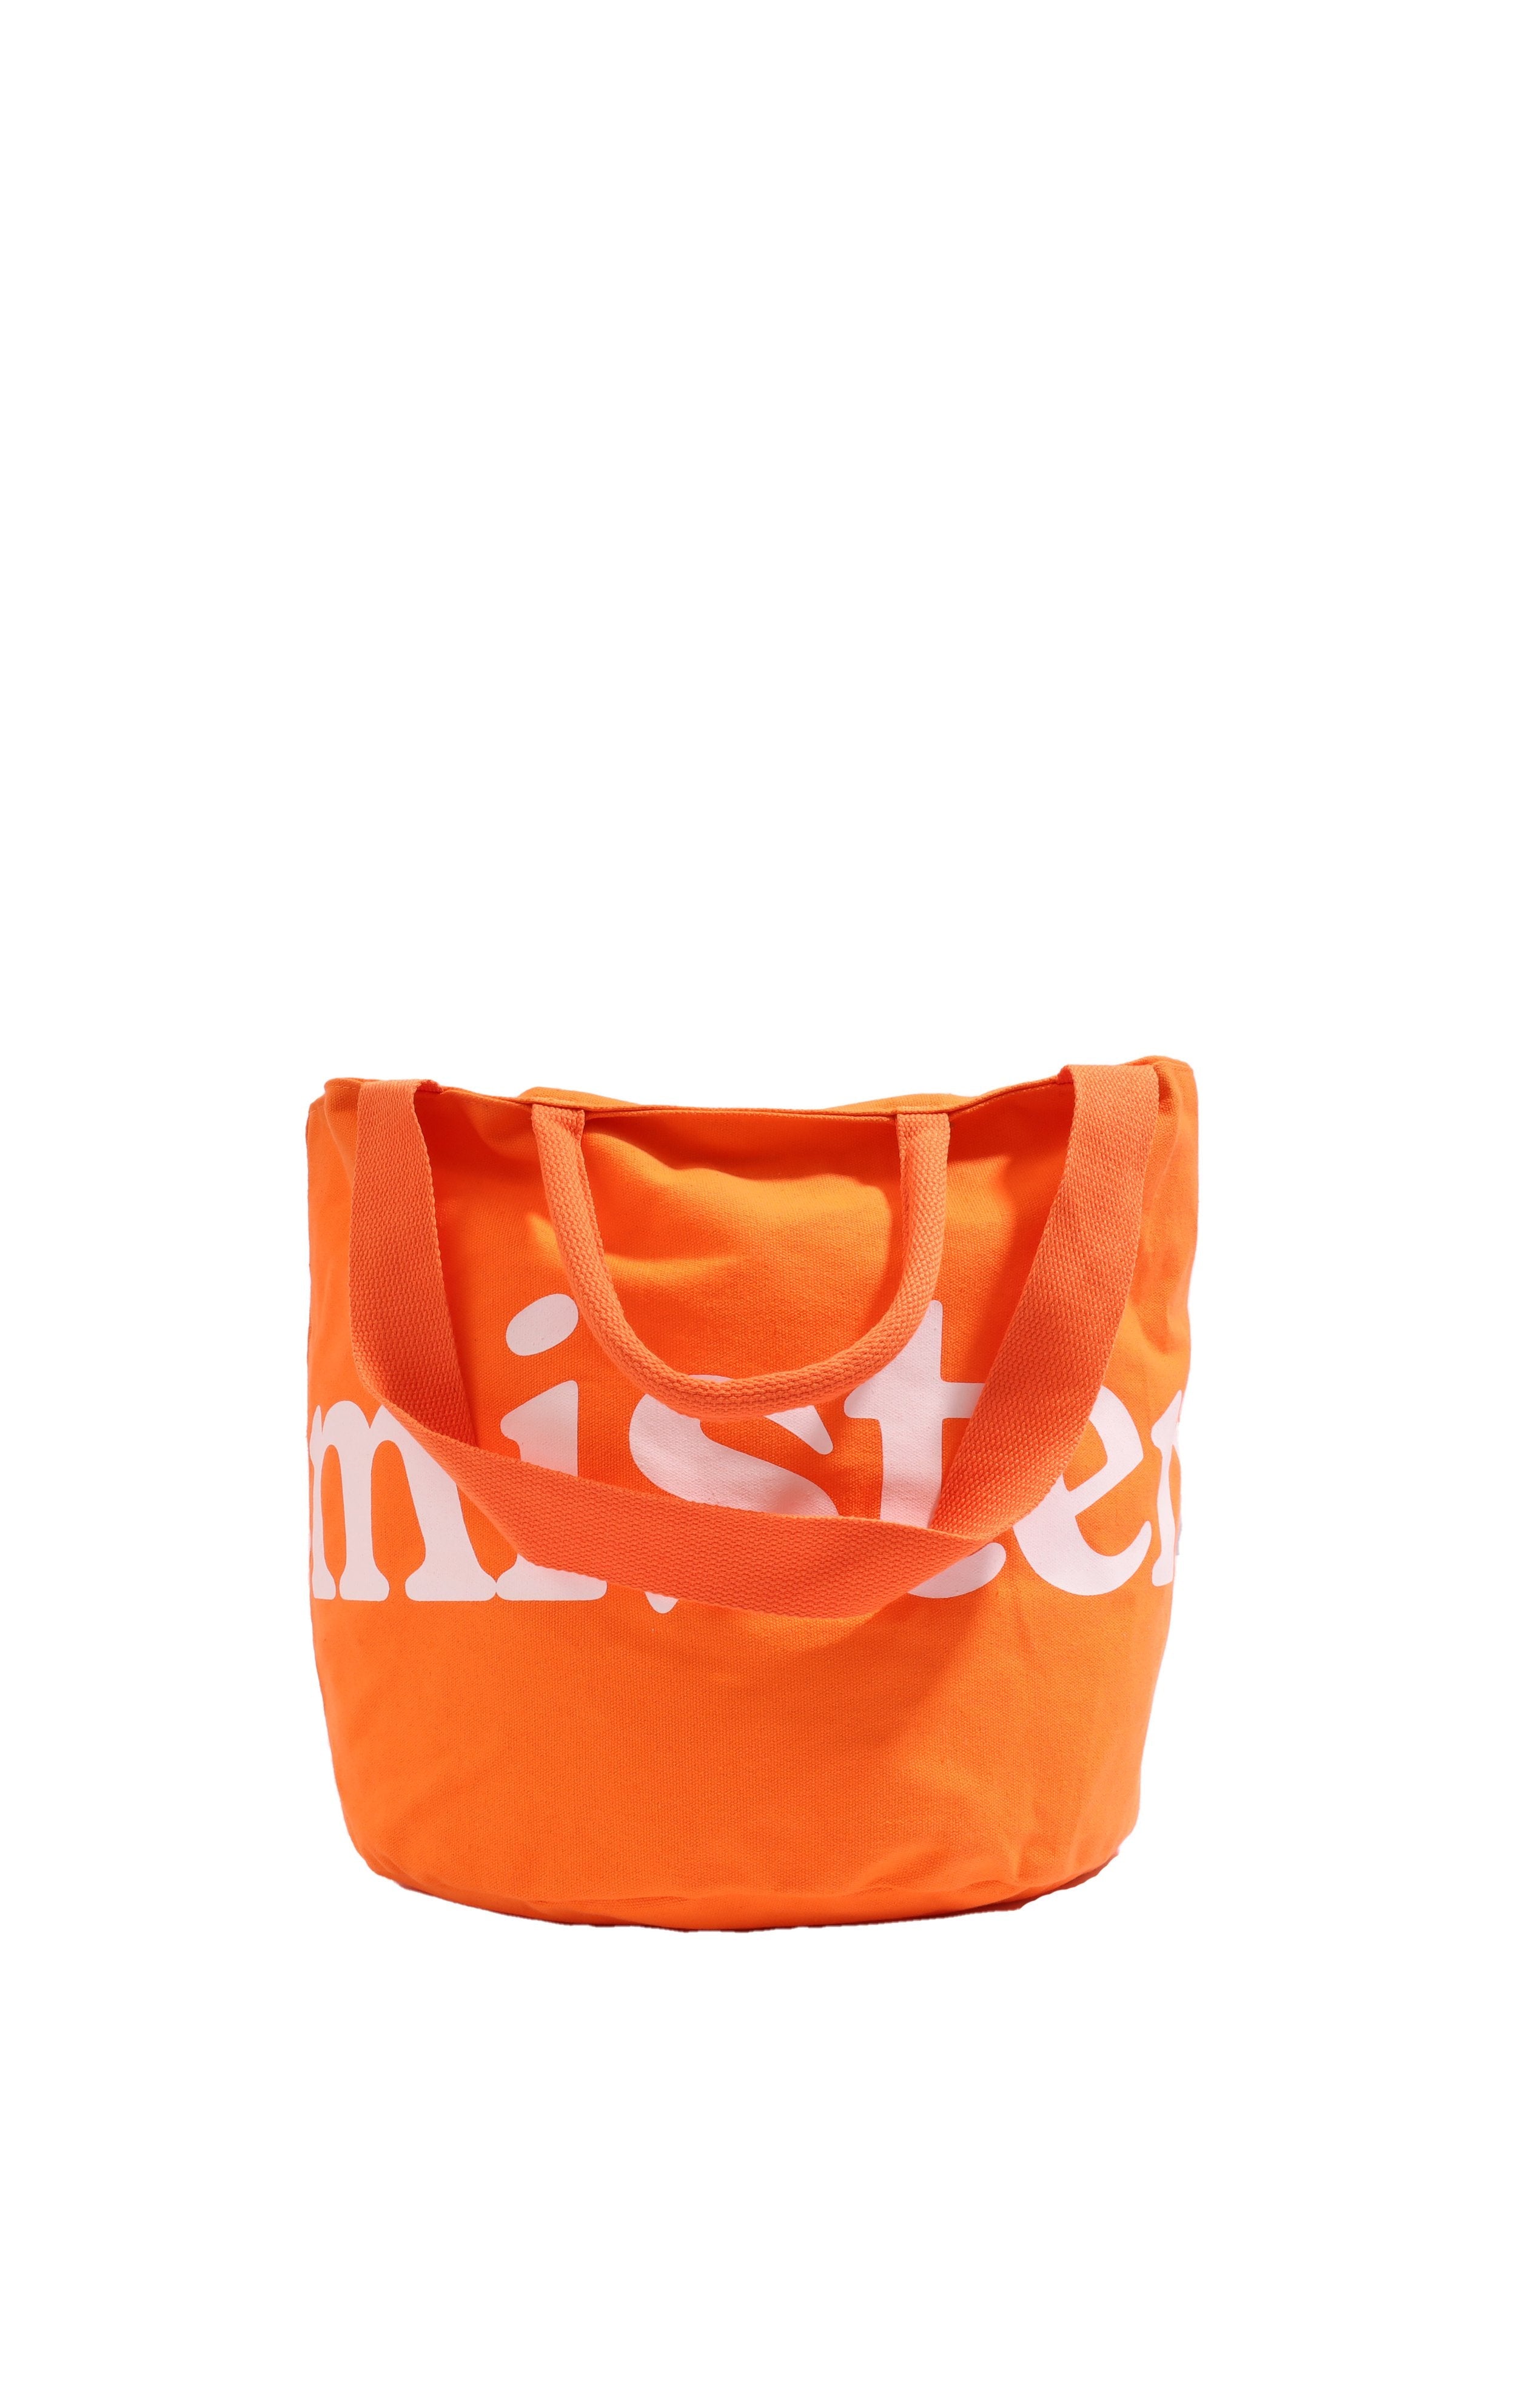 Small Round Tote / Grow Bag - Orange-Mister Green-Mister Green